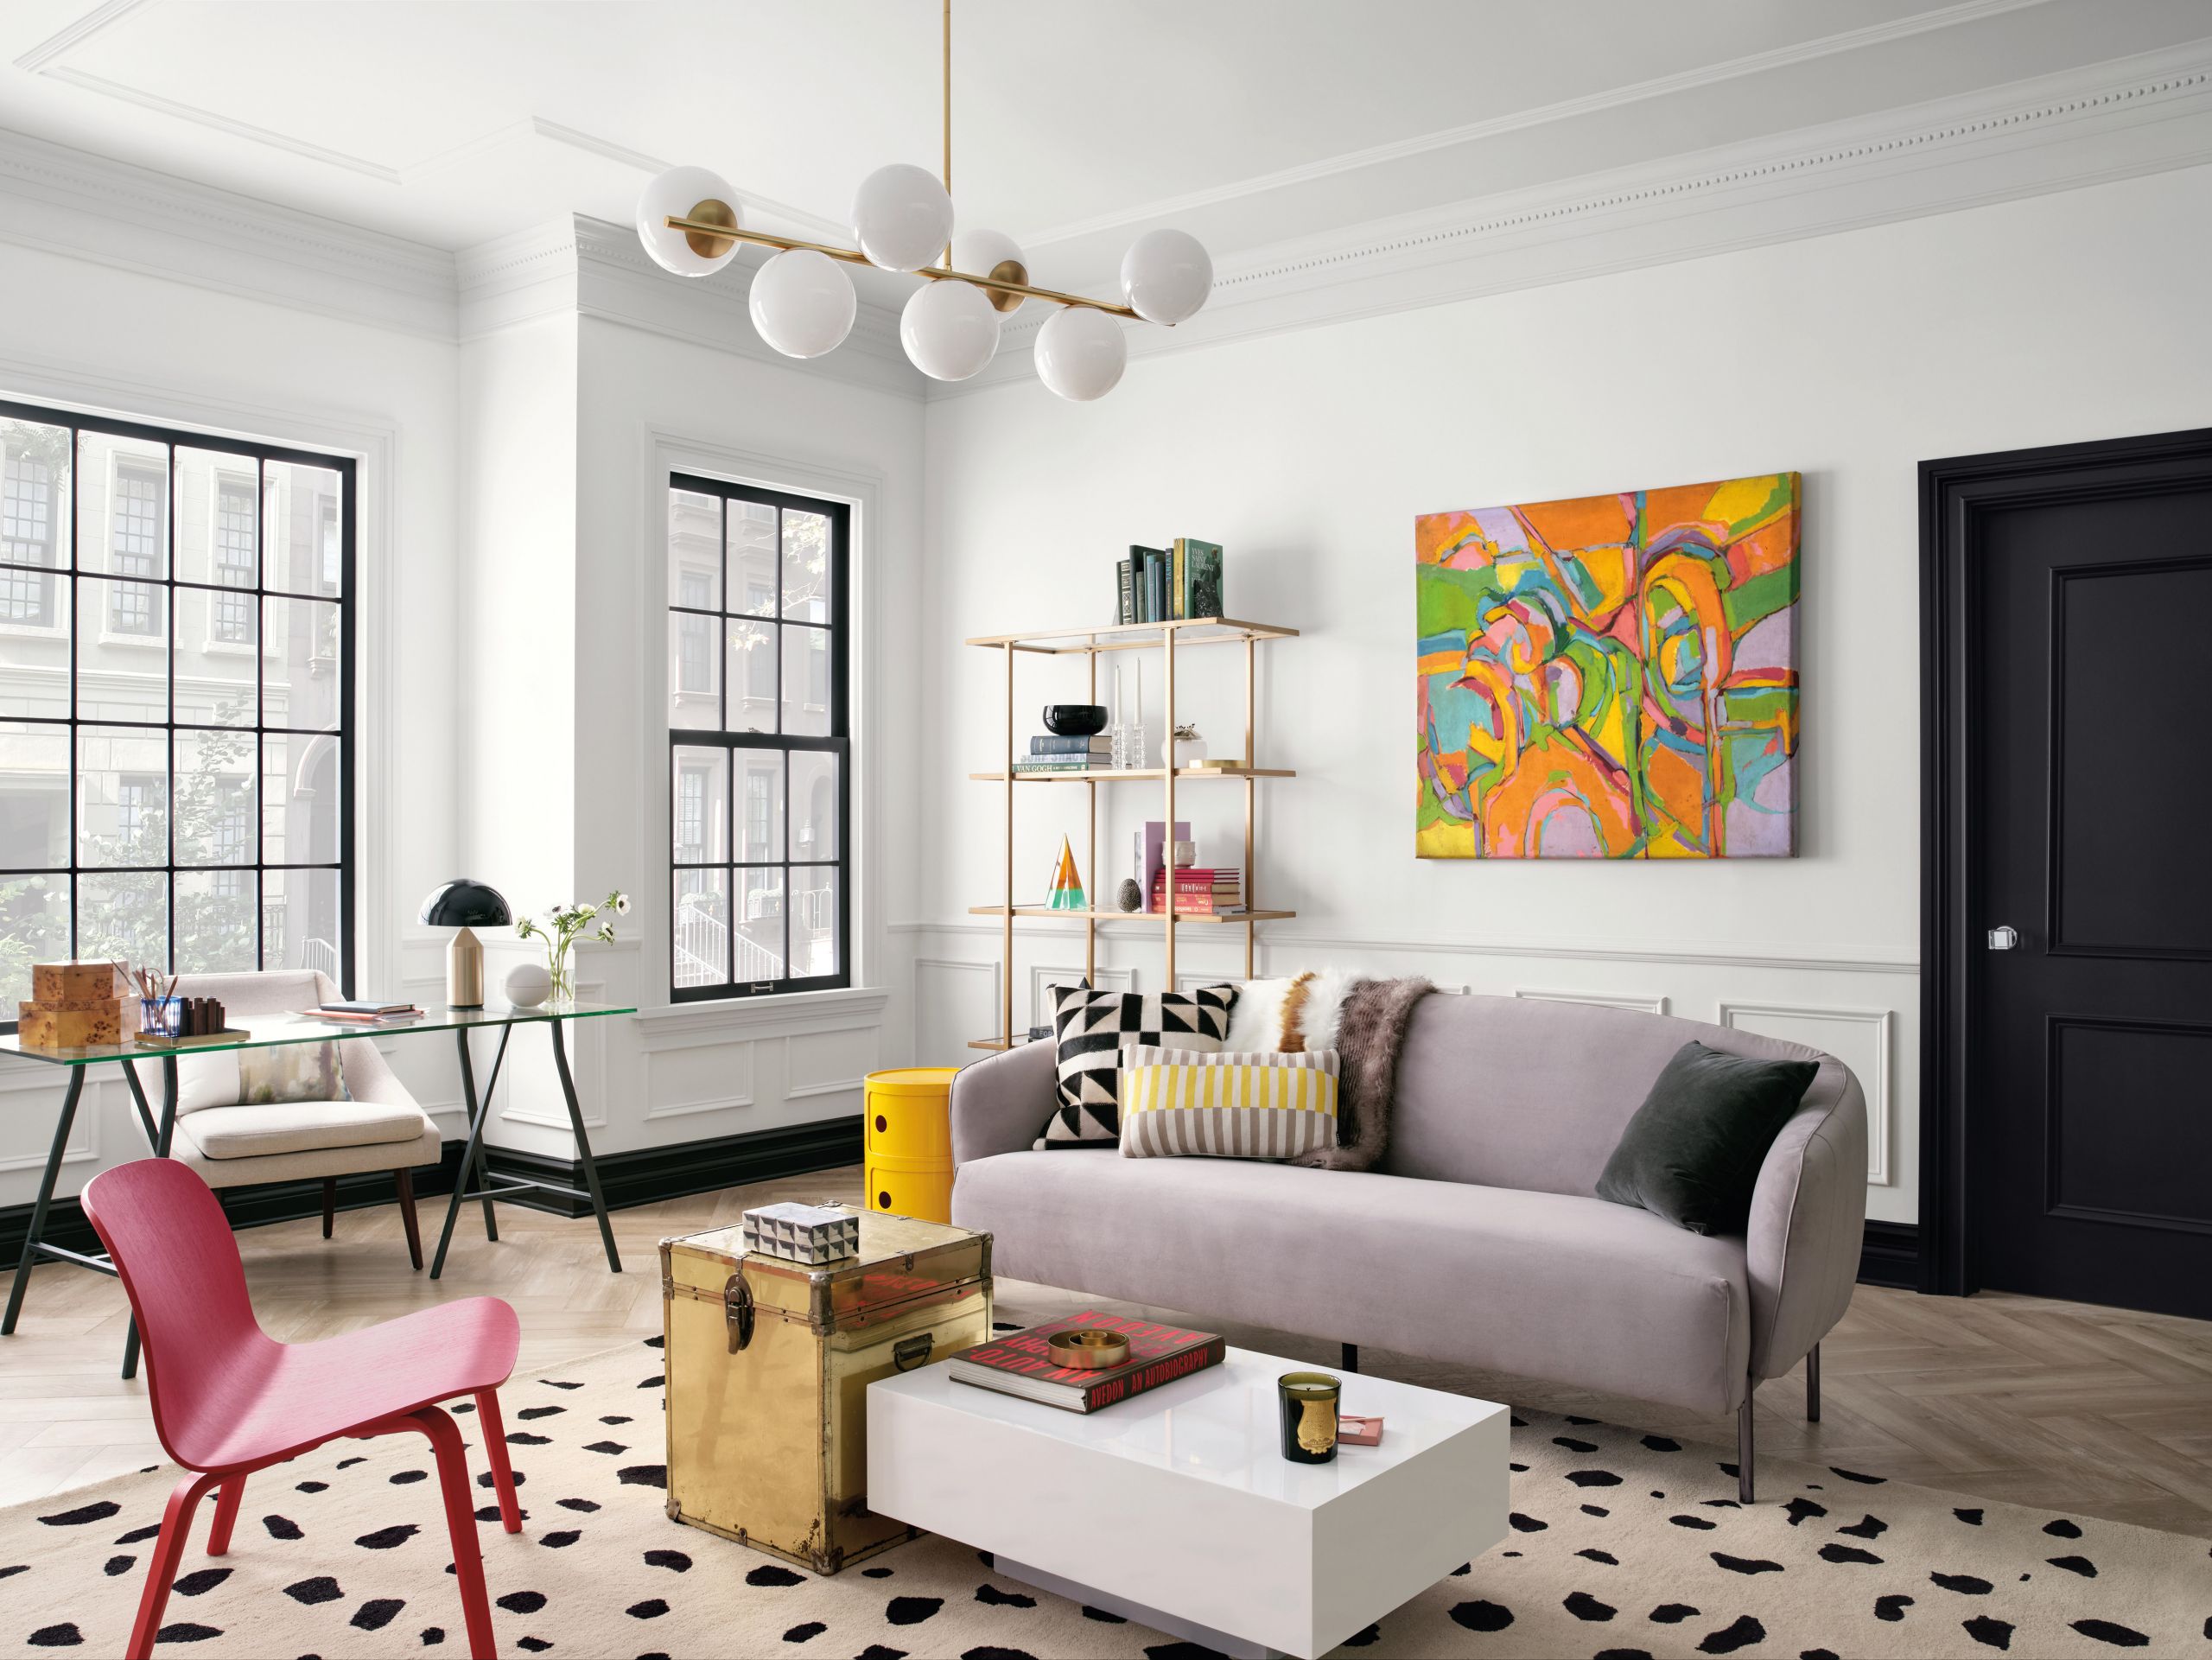 Popular Living Room Colors 2020
 Sherwin Williams’ 2020 Colormix Forecast Is Full of Color